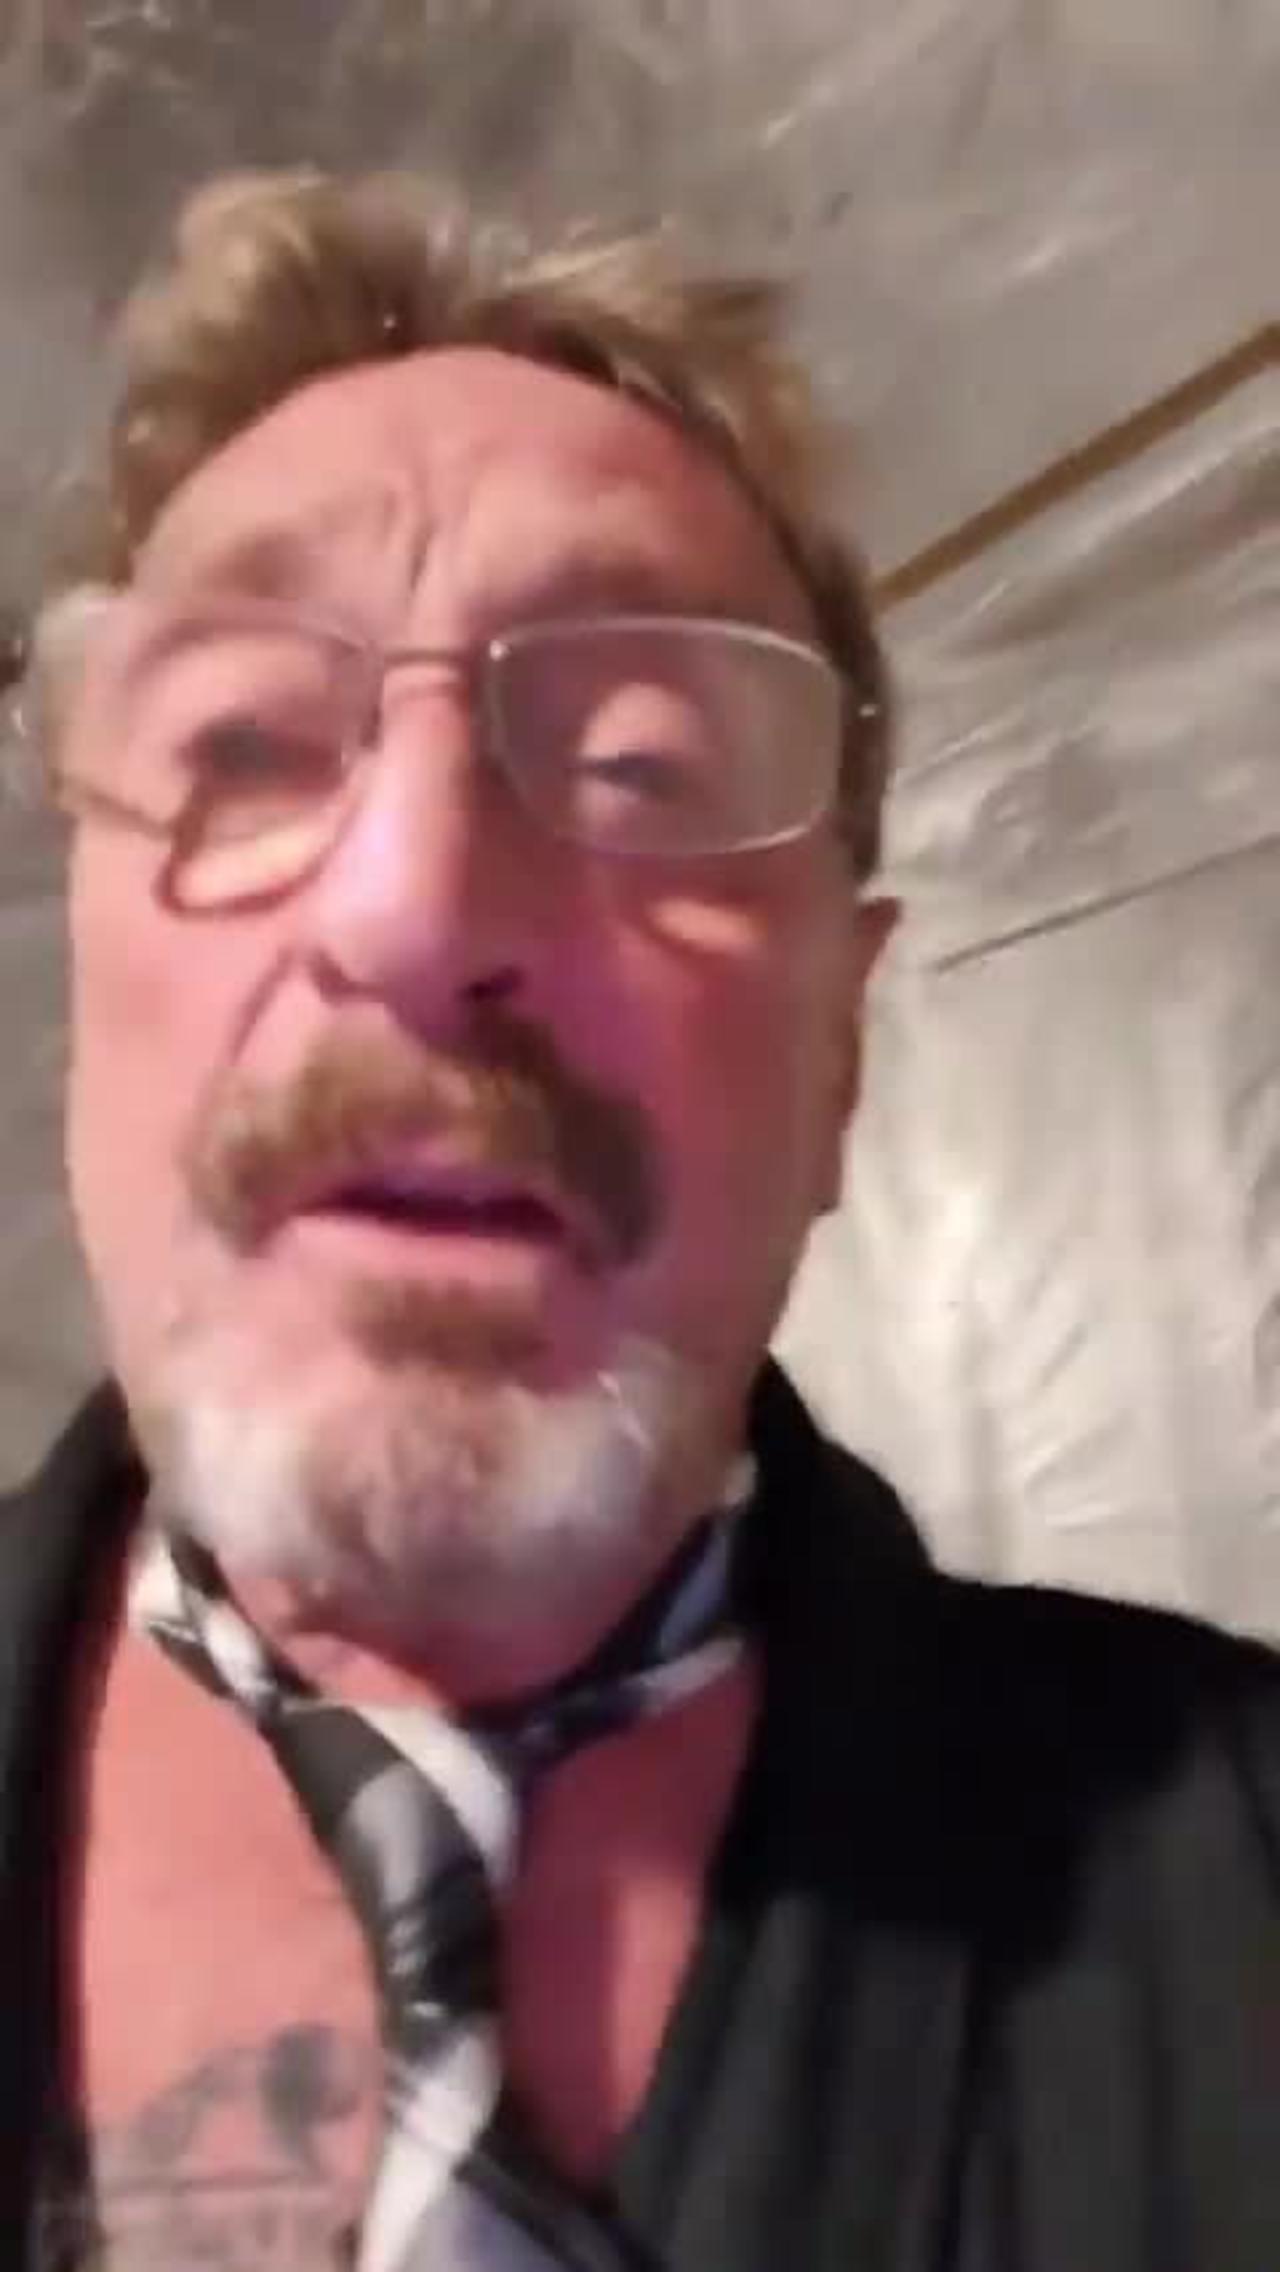 John McAfee - Posted August 26, 2022